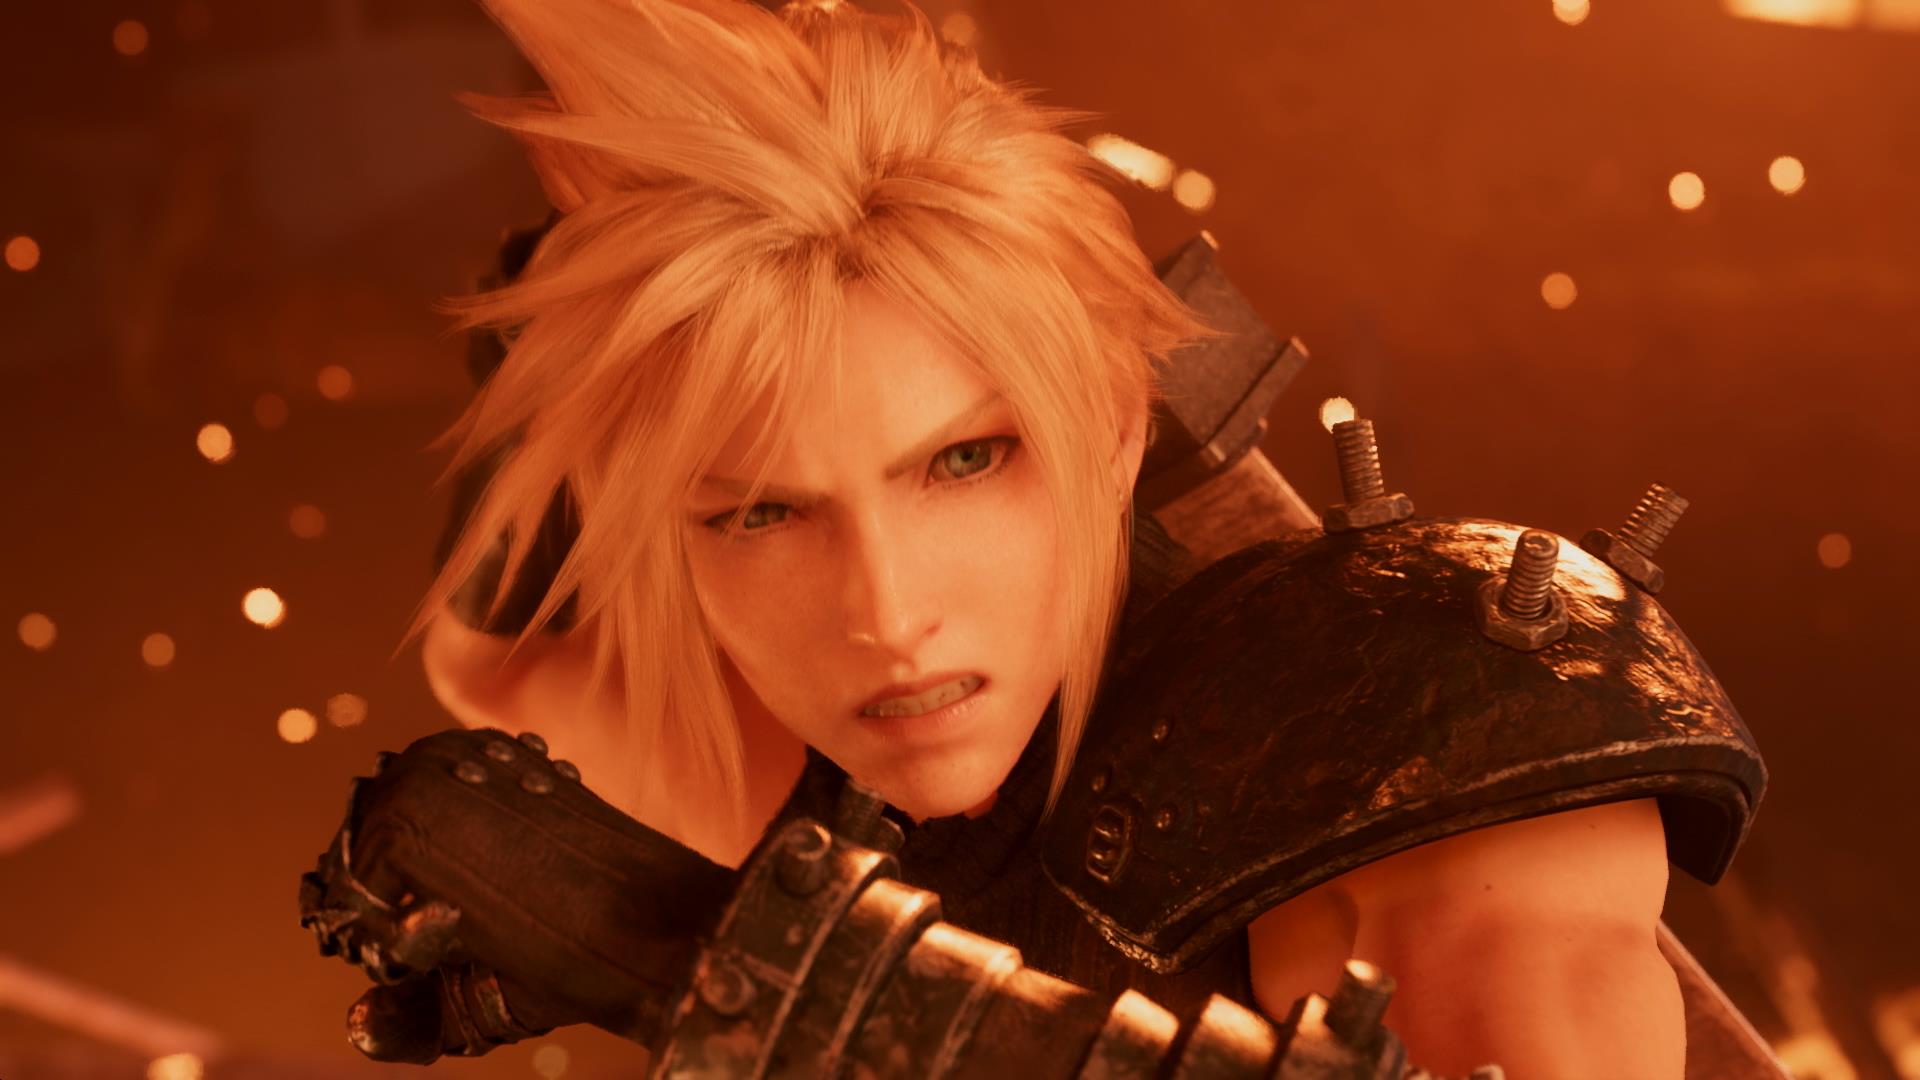 Final Fantasy 7 Remake 2 Is Officially In Development